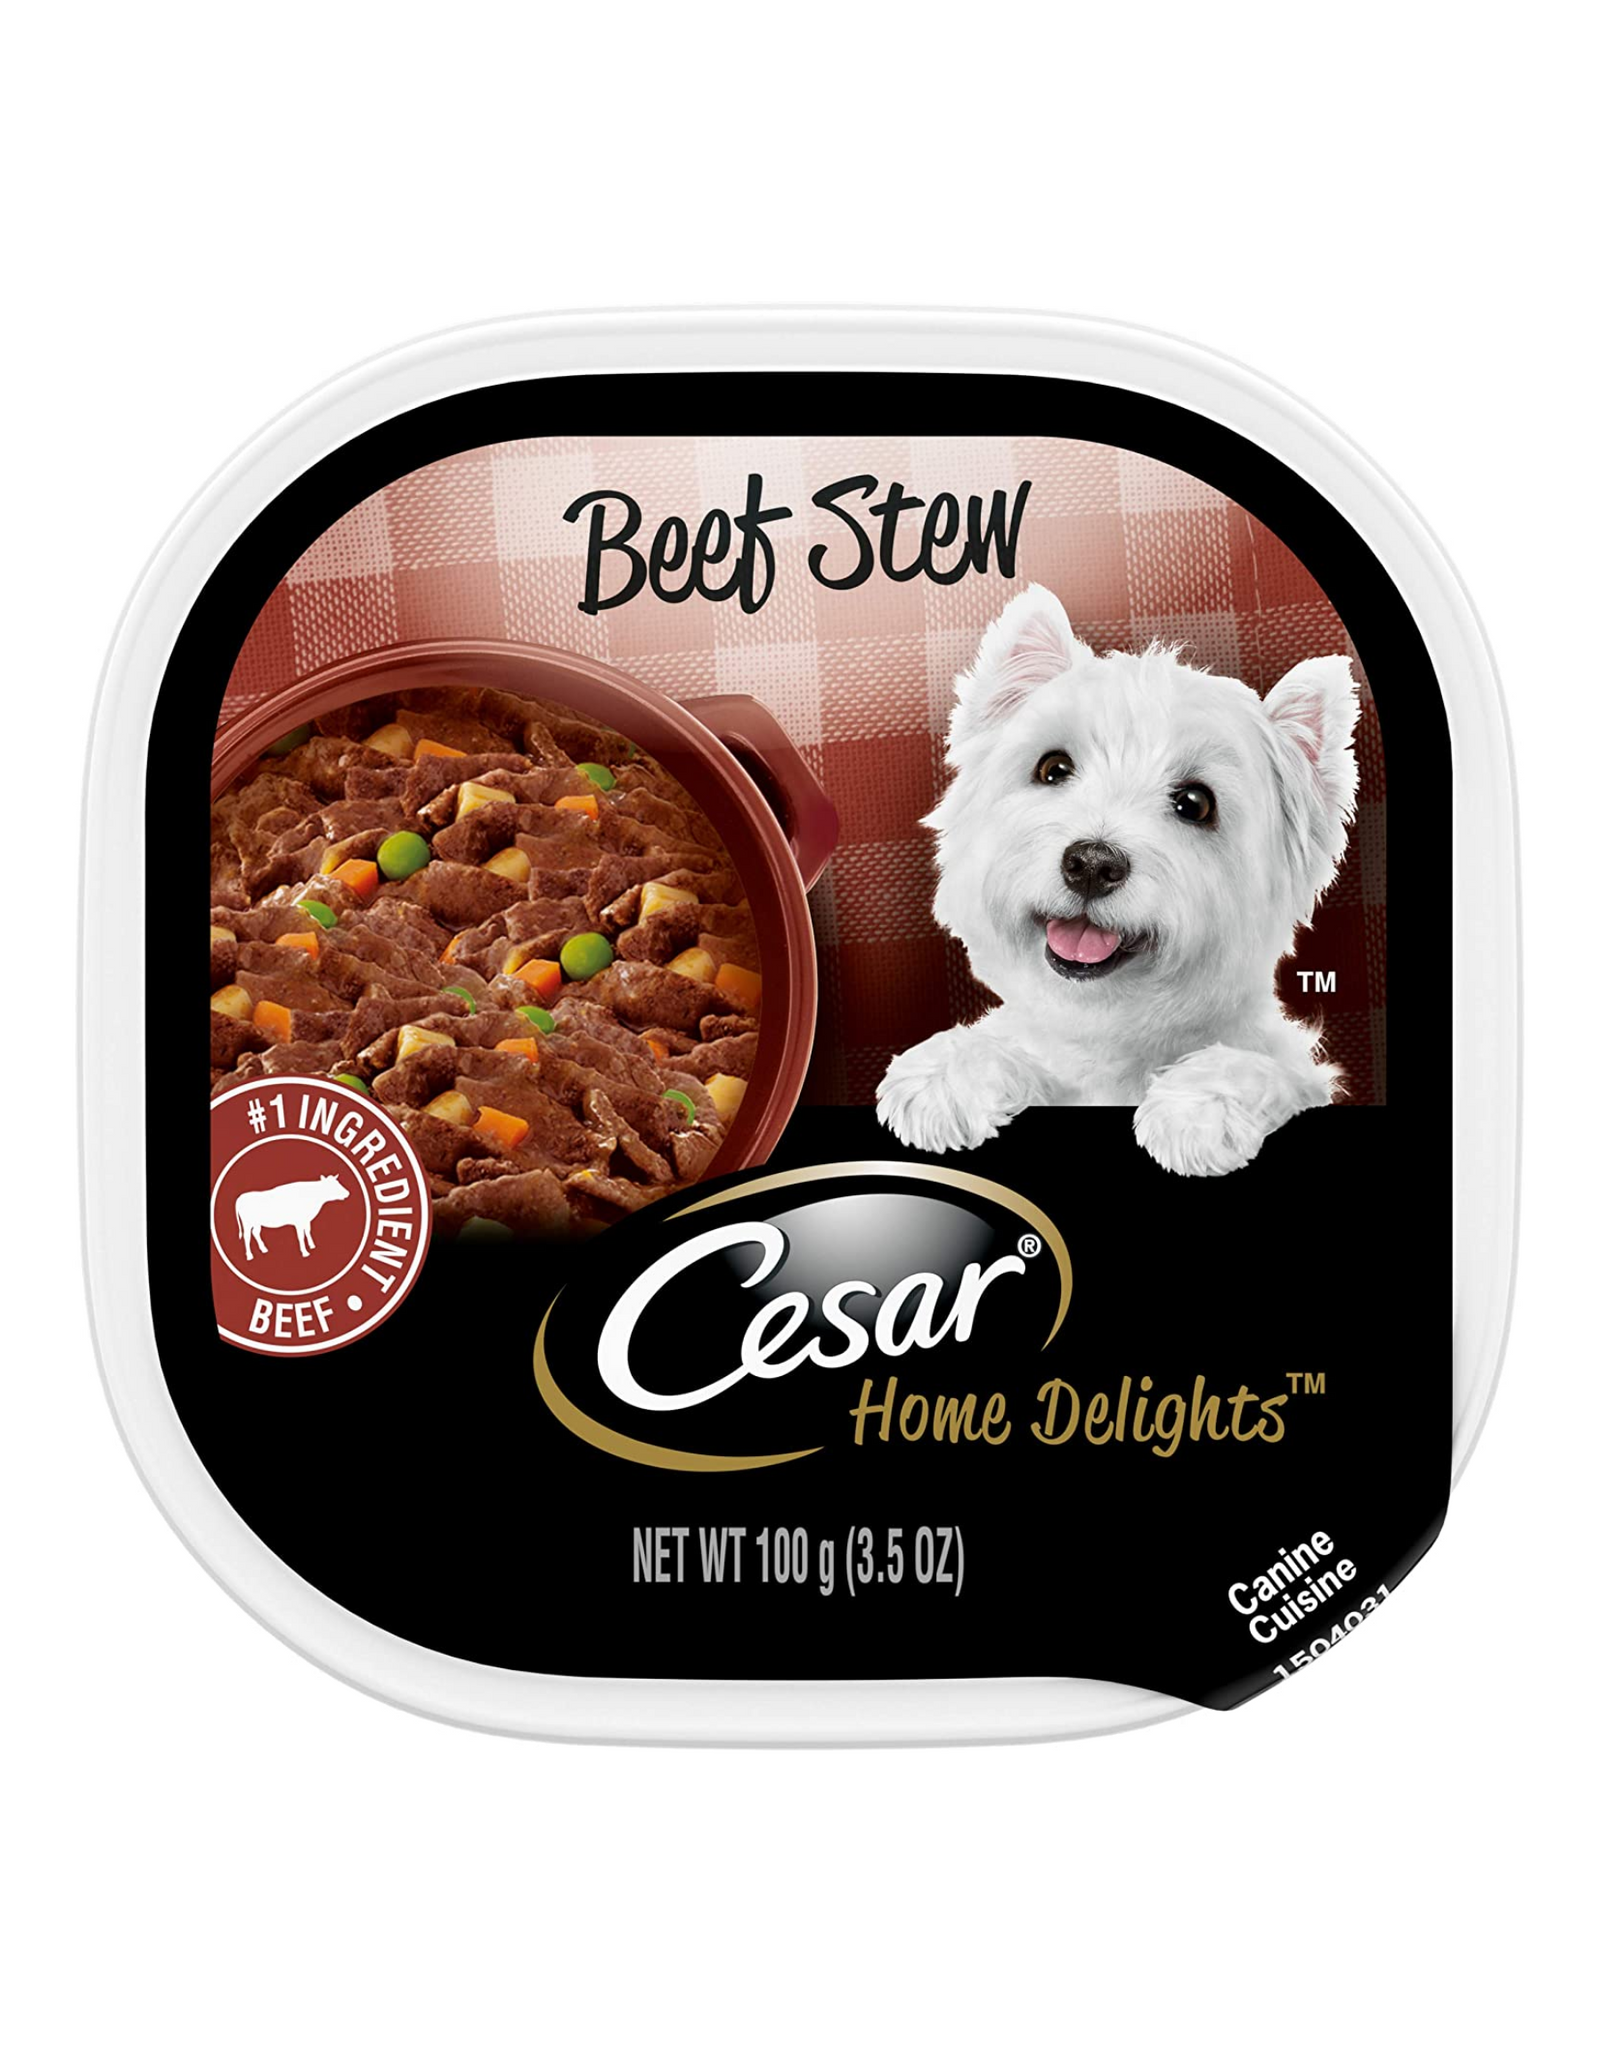 CESAR HOME DELIGHTS Beef Stew, Easy Peel Trays, 3.5 Oz 24 Count